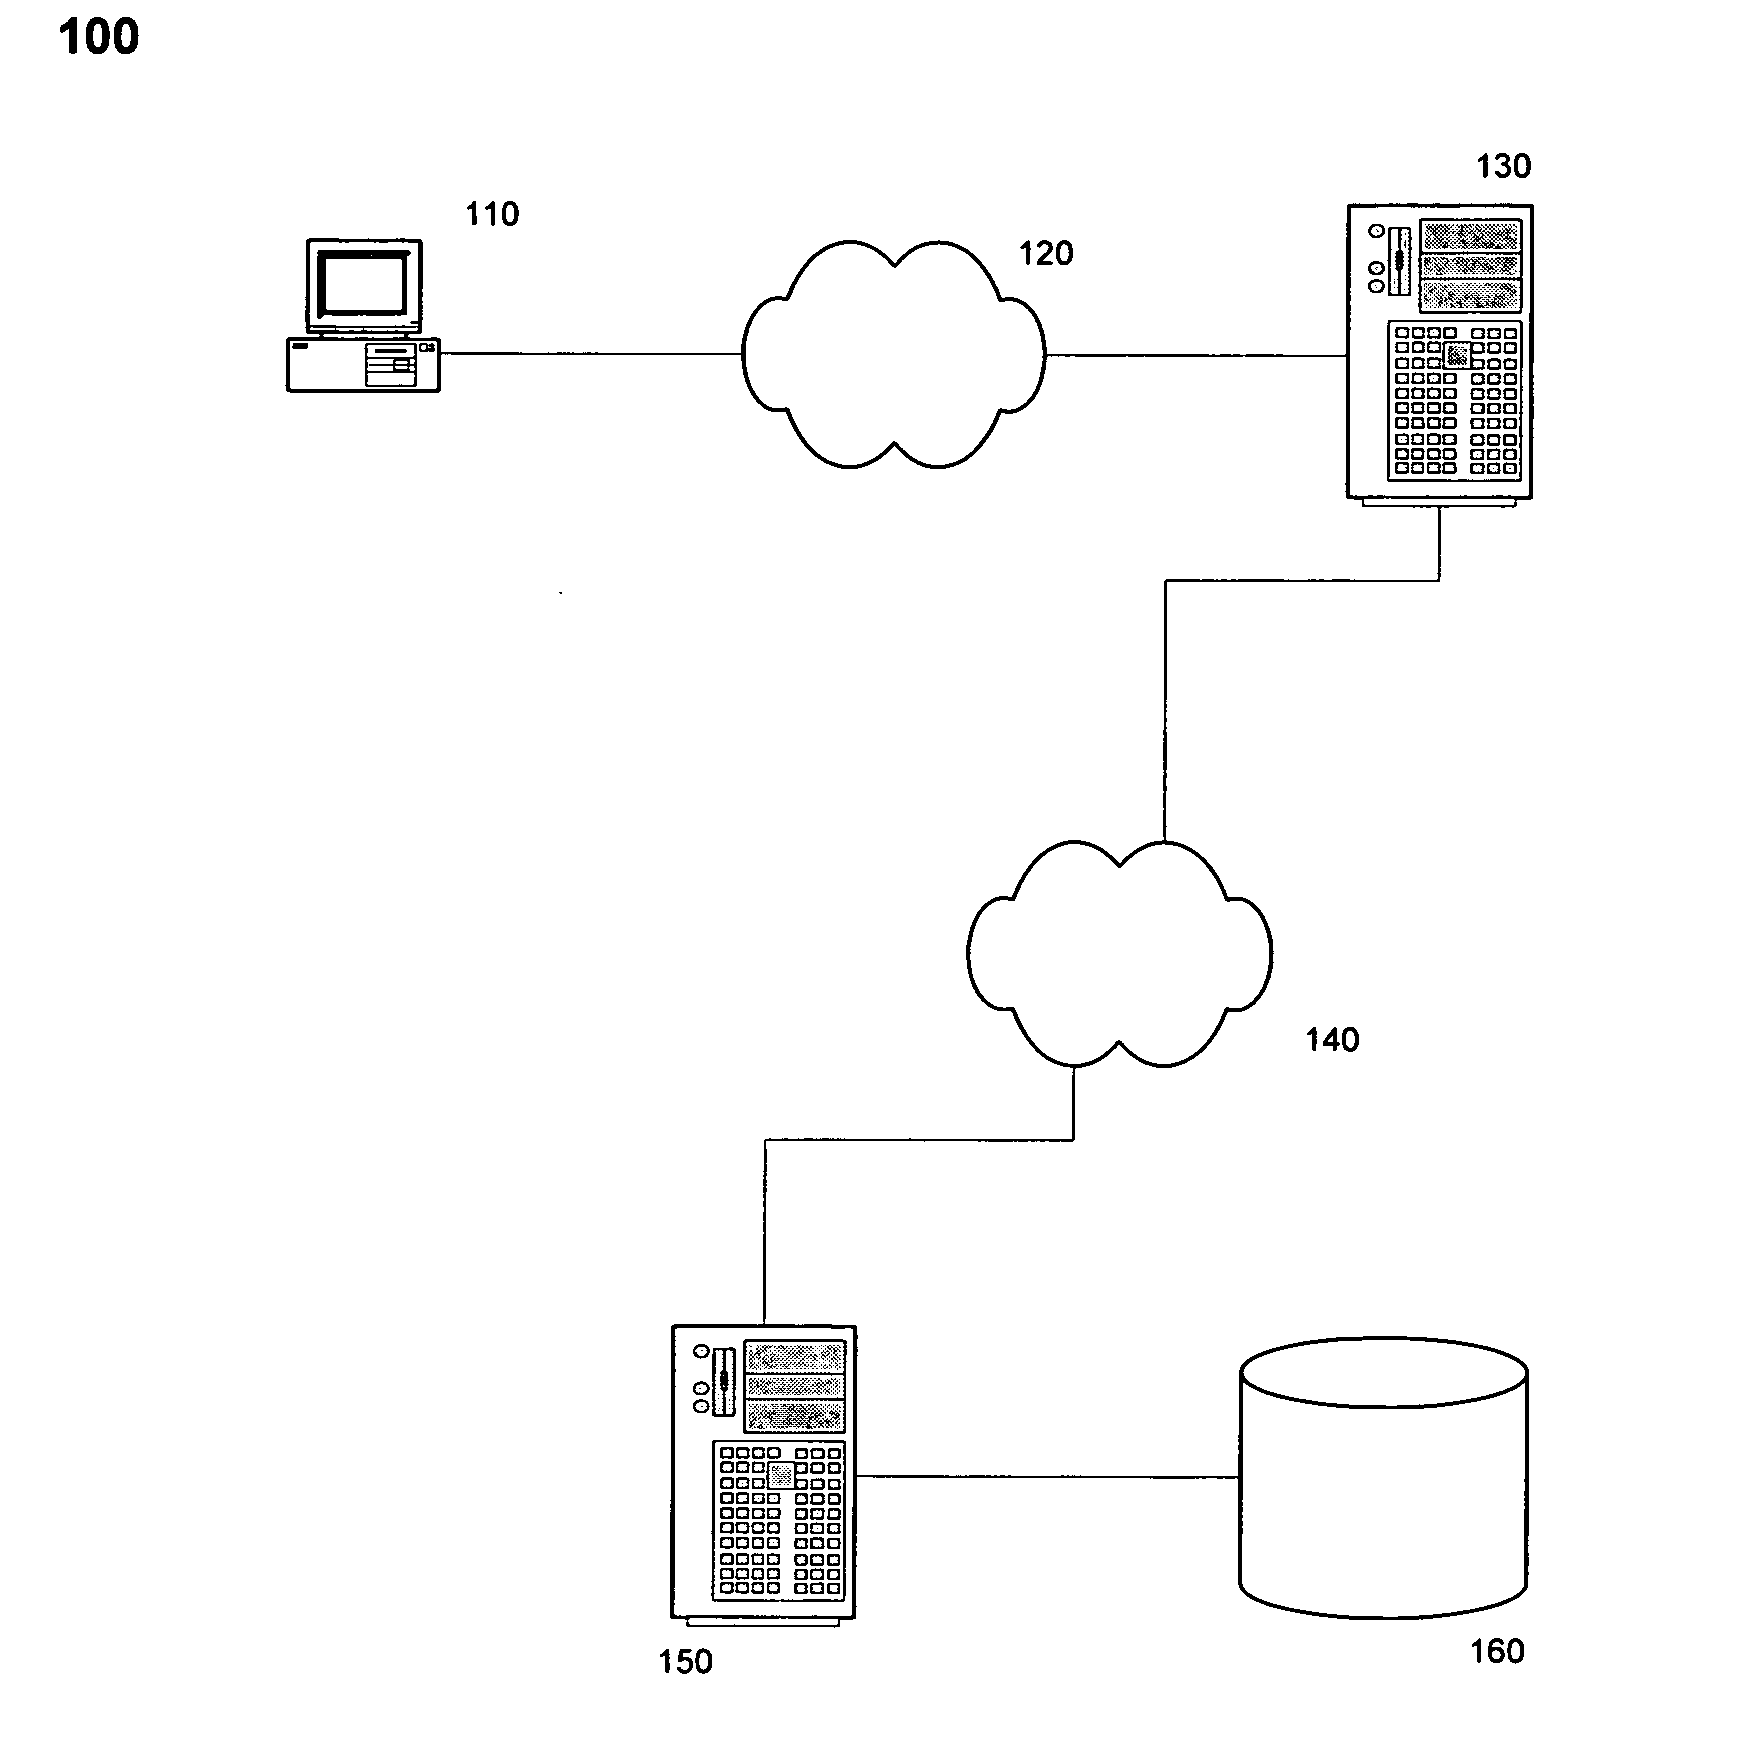 System and method for generating production-quality data to support software testing